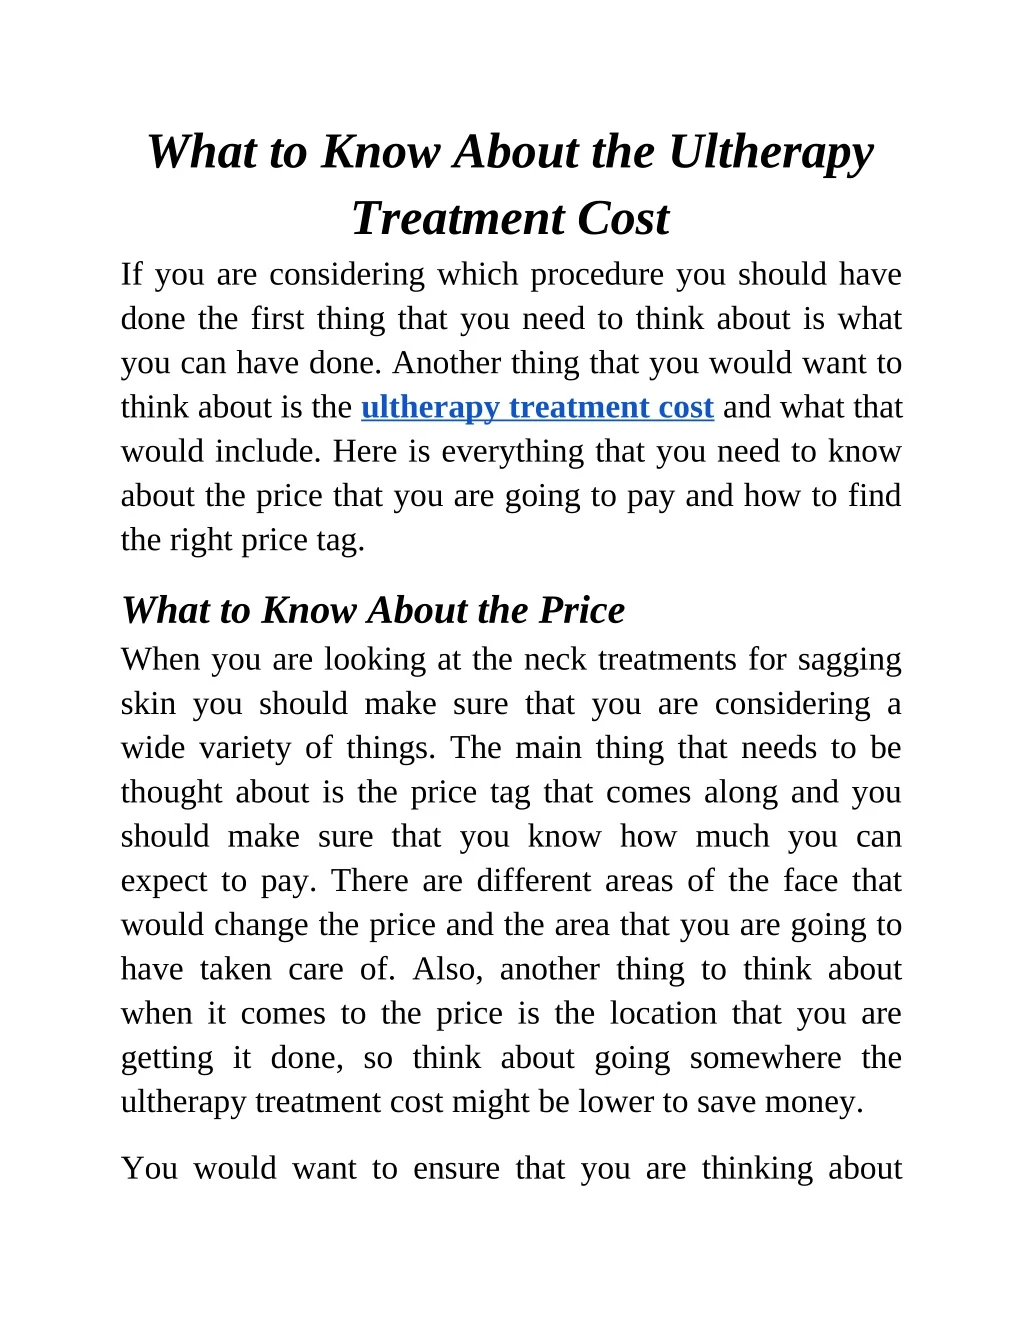 what to know about the ultherapy treatment cost